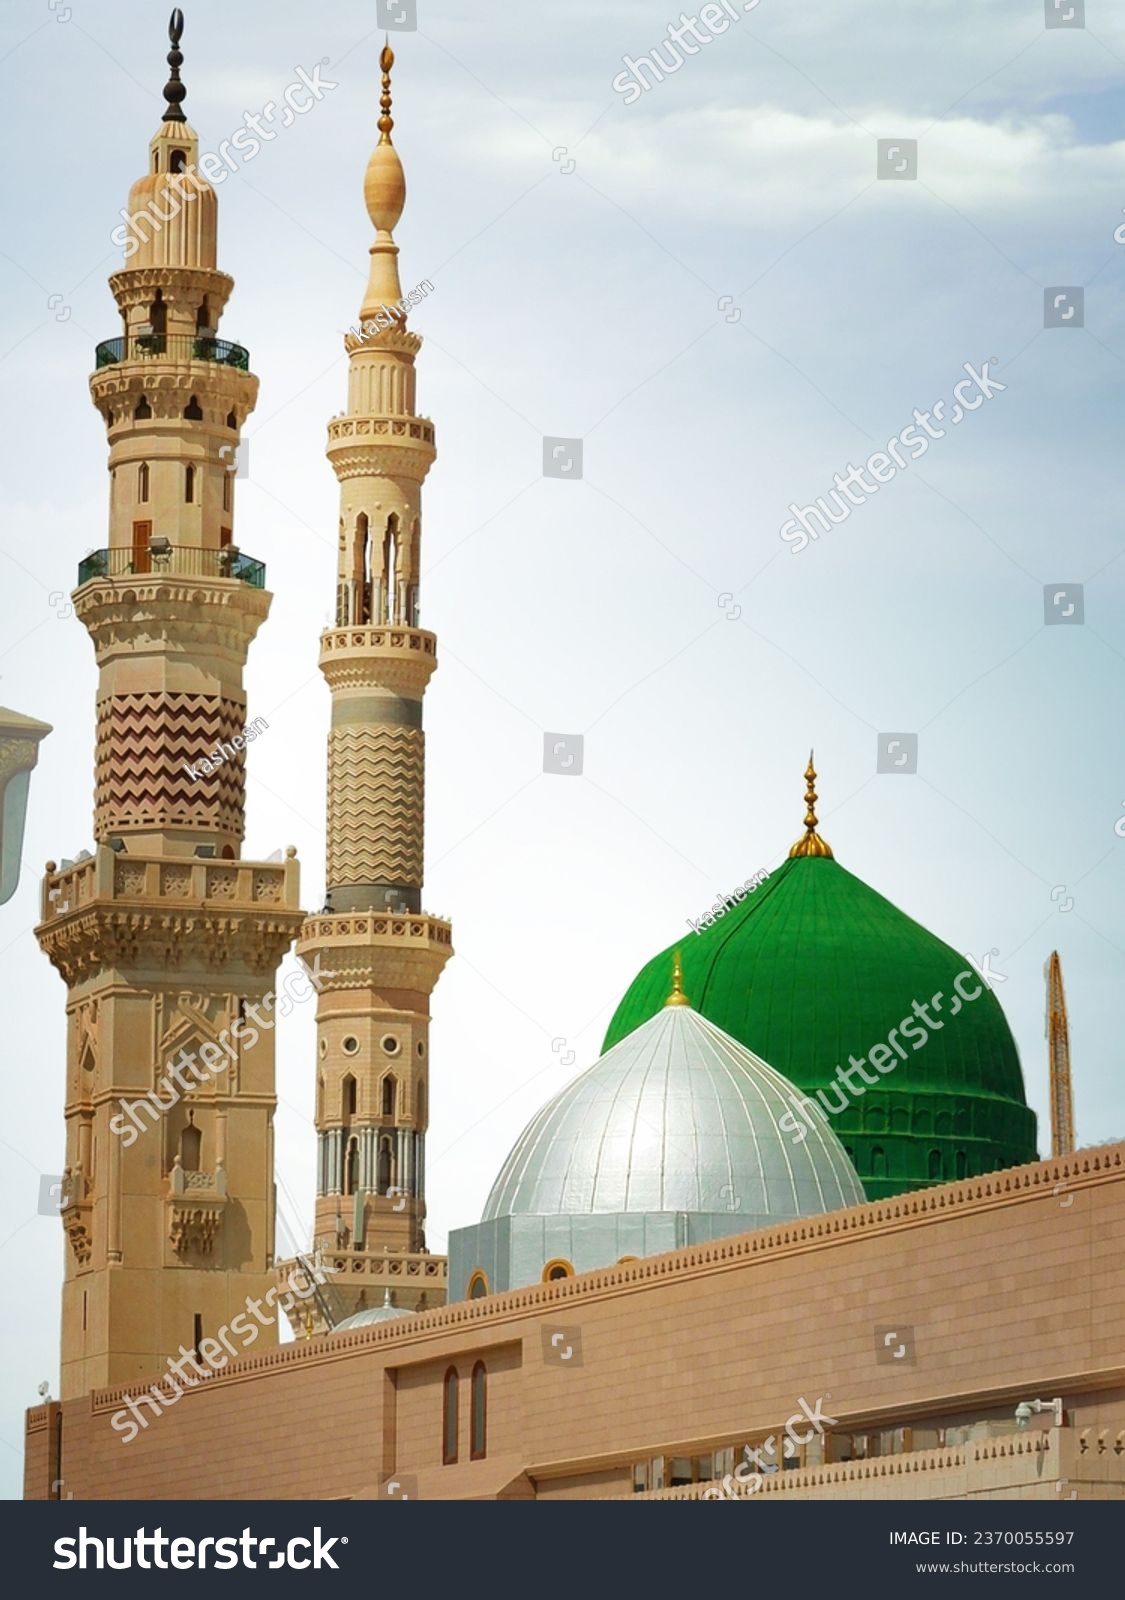 The famous green  domes of the Prophet's Mosque. Masjid an-Nabawi. The mosque was founded by Prophet Muhammad. #2370055597